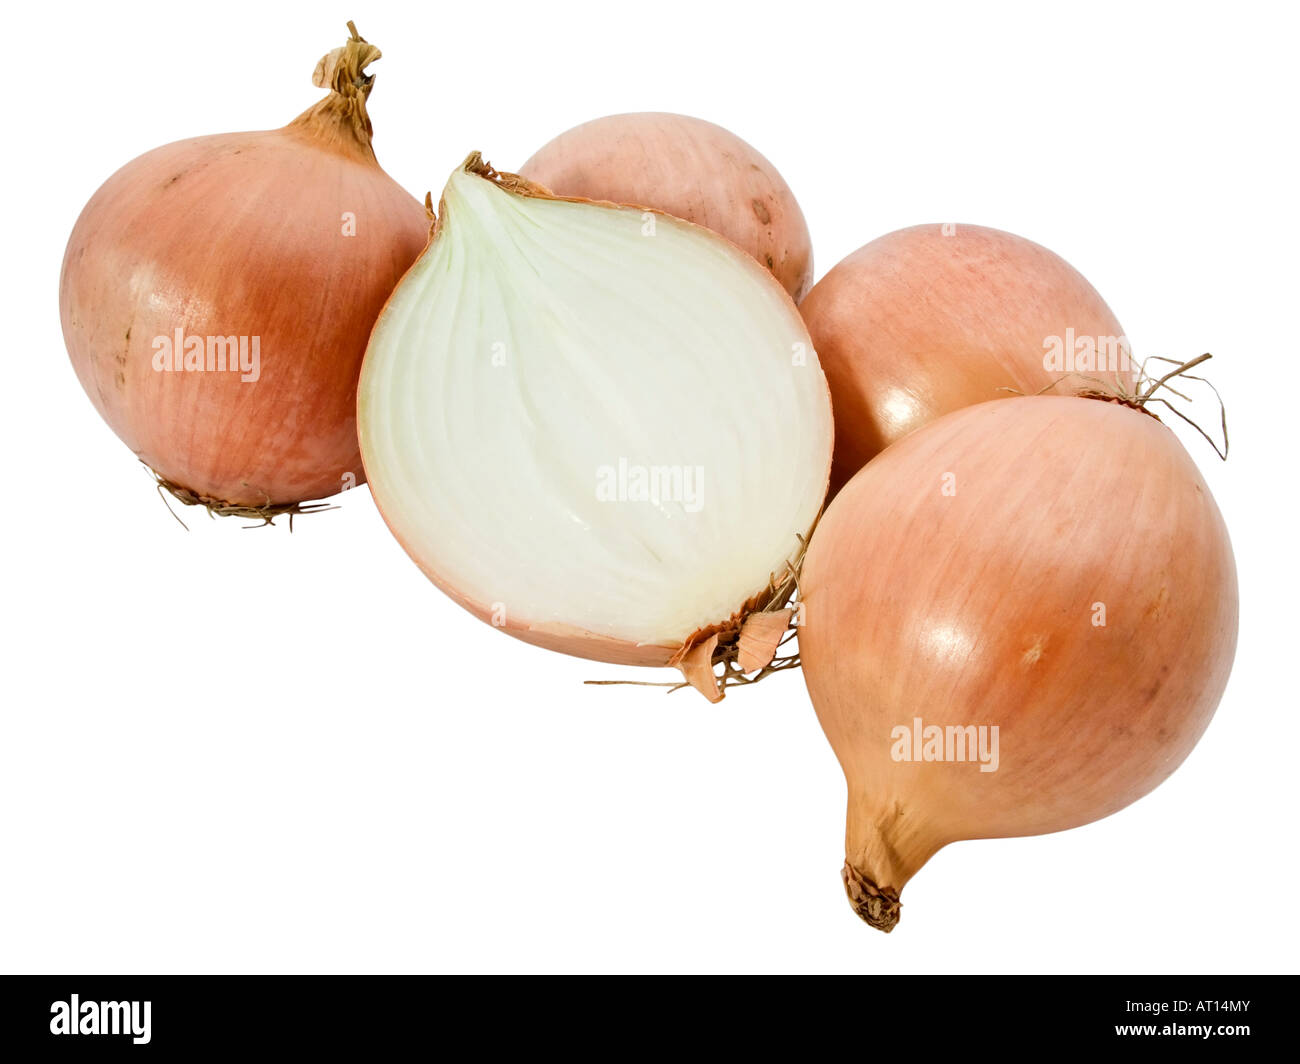 Onions isolated over white background, with one sliced in half. Stock Photo